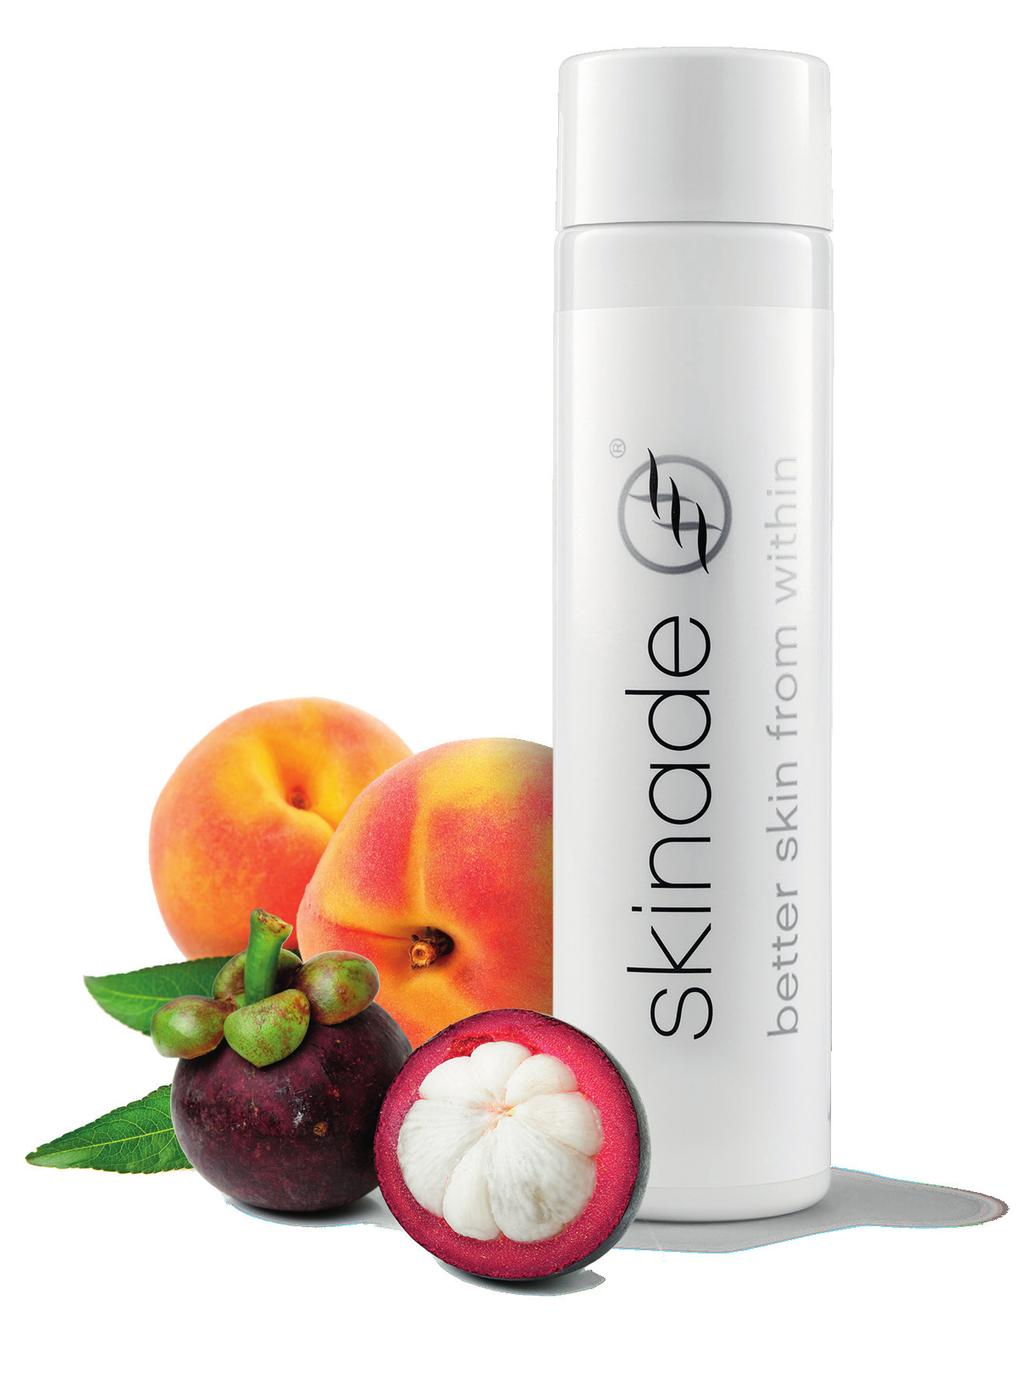 what is skinade? skinade is a drink that supports the skin all over your body.